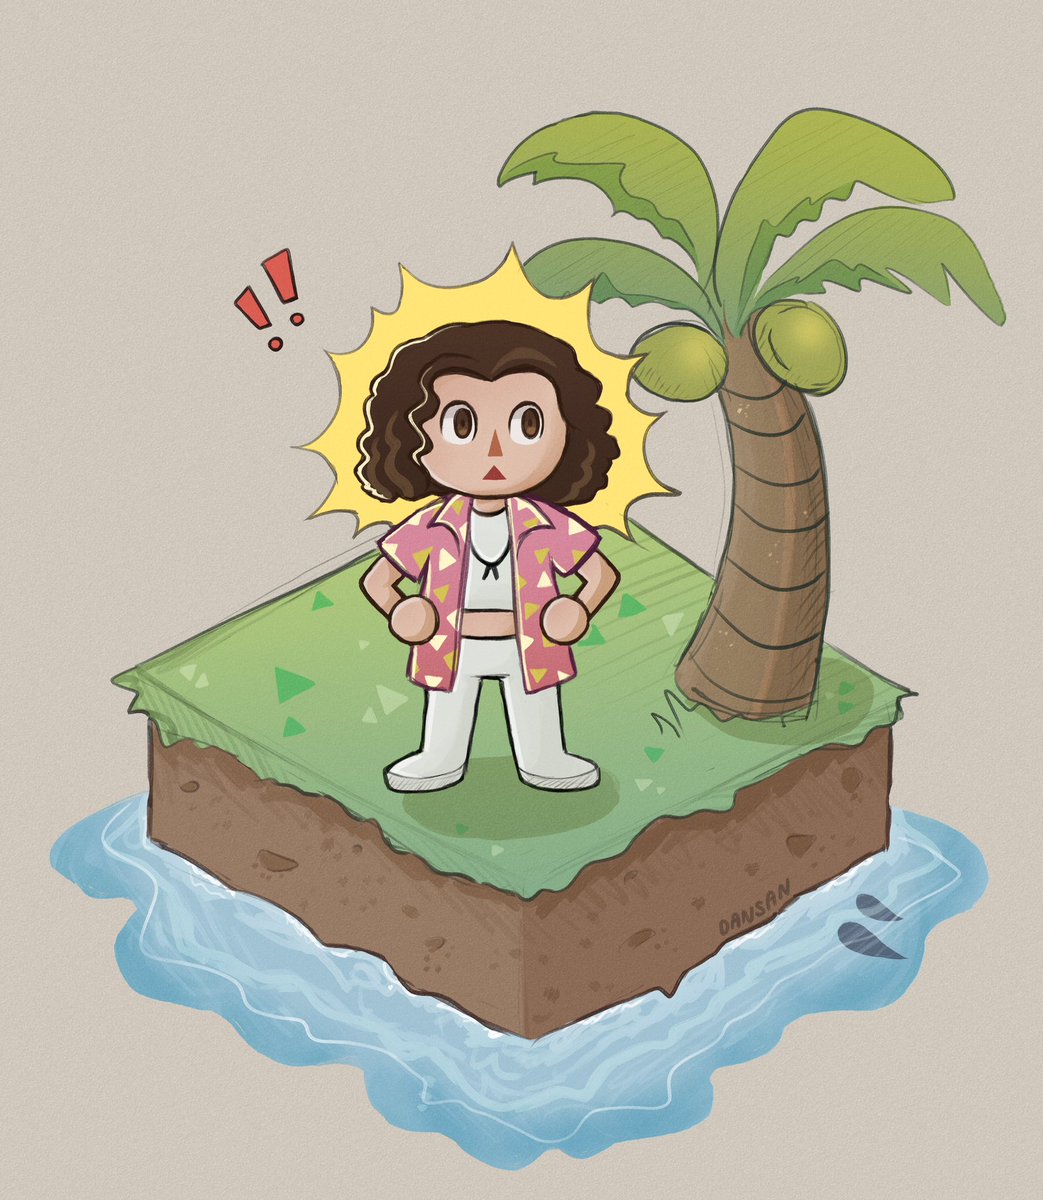 villager jash stranded on an island… what will he do #chonnyjash